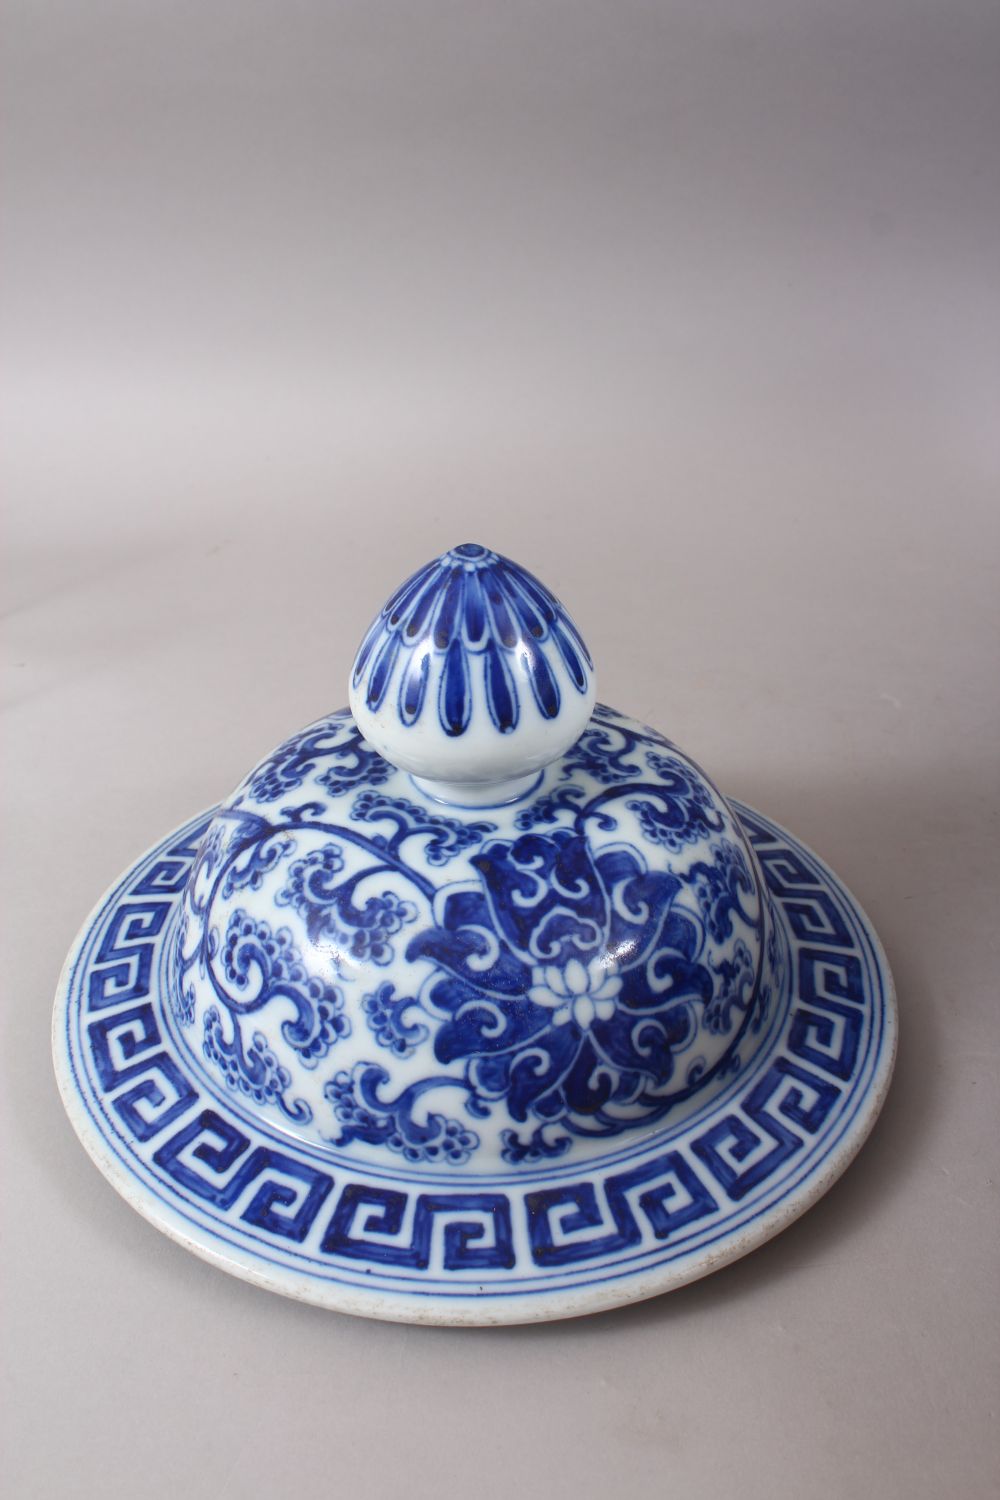 A LARGE CHINESE BLUE & WHITE PORCELAIN LIDDED JAR, the body decorated with scenes of formal - Image 5 of 8